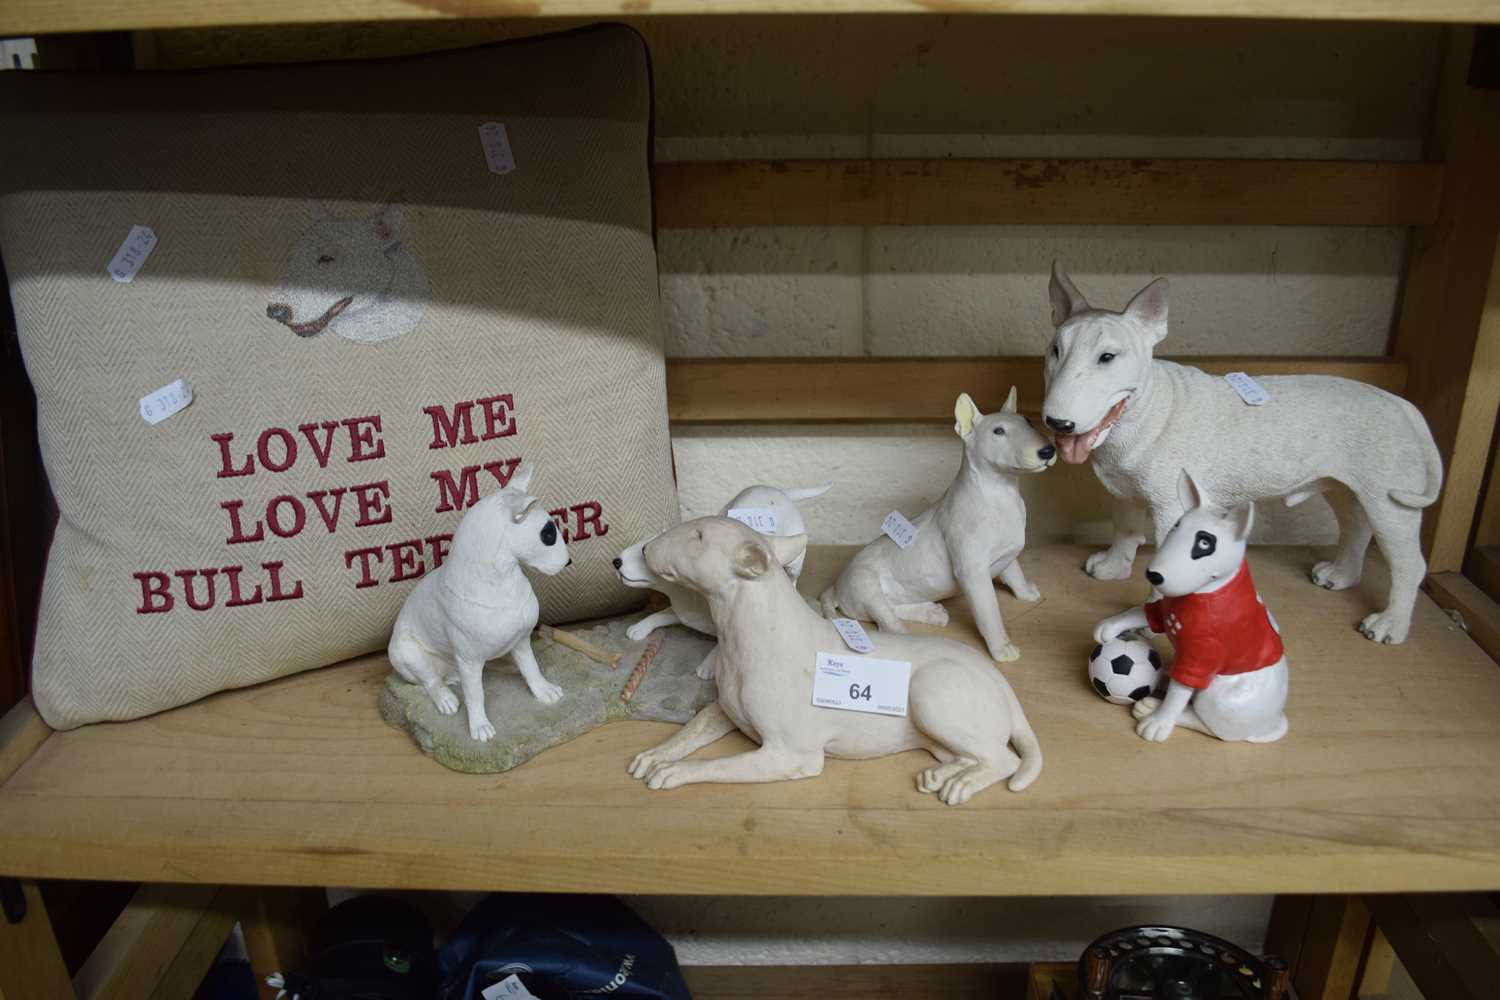 A quantity of Bull Terrier figurines together with a Bull Terrier cushion